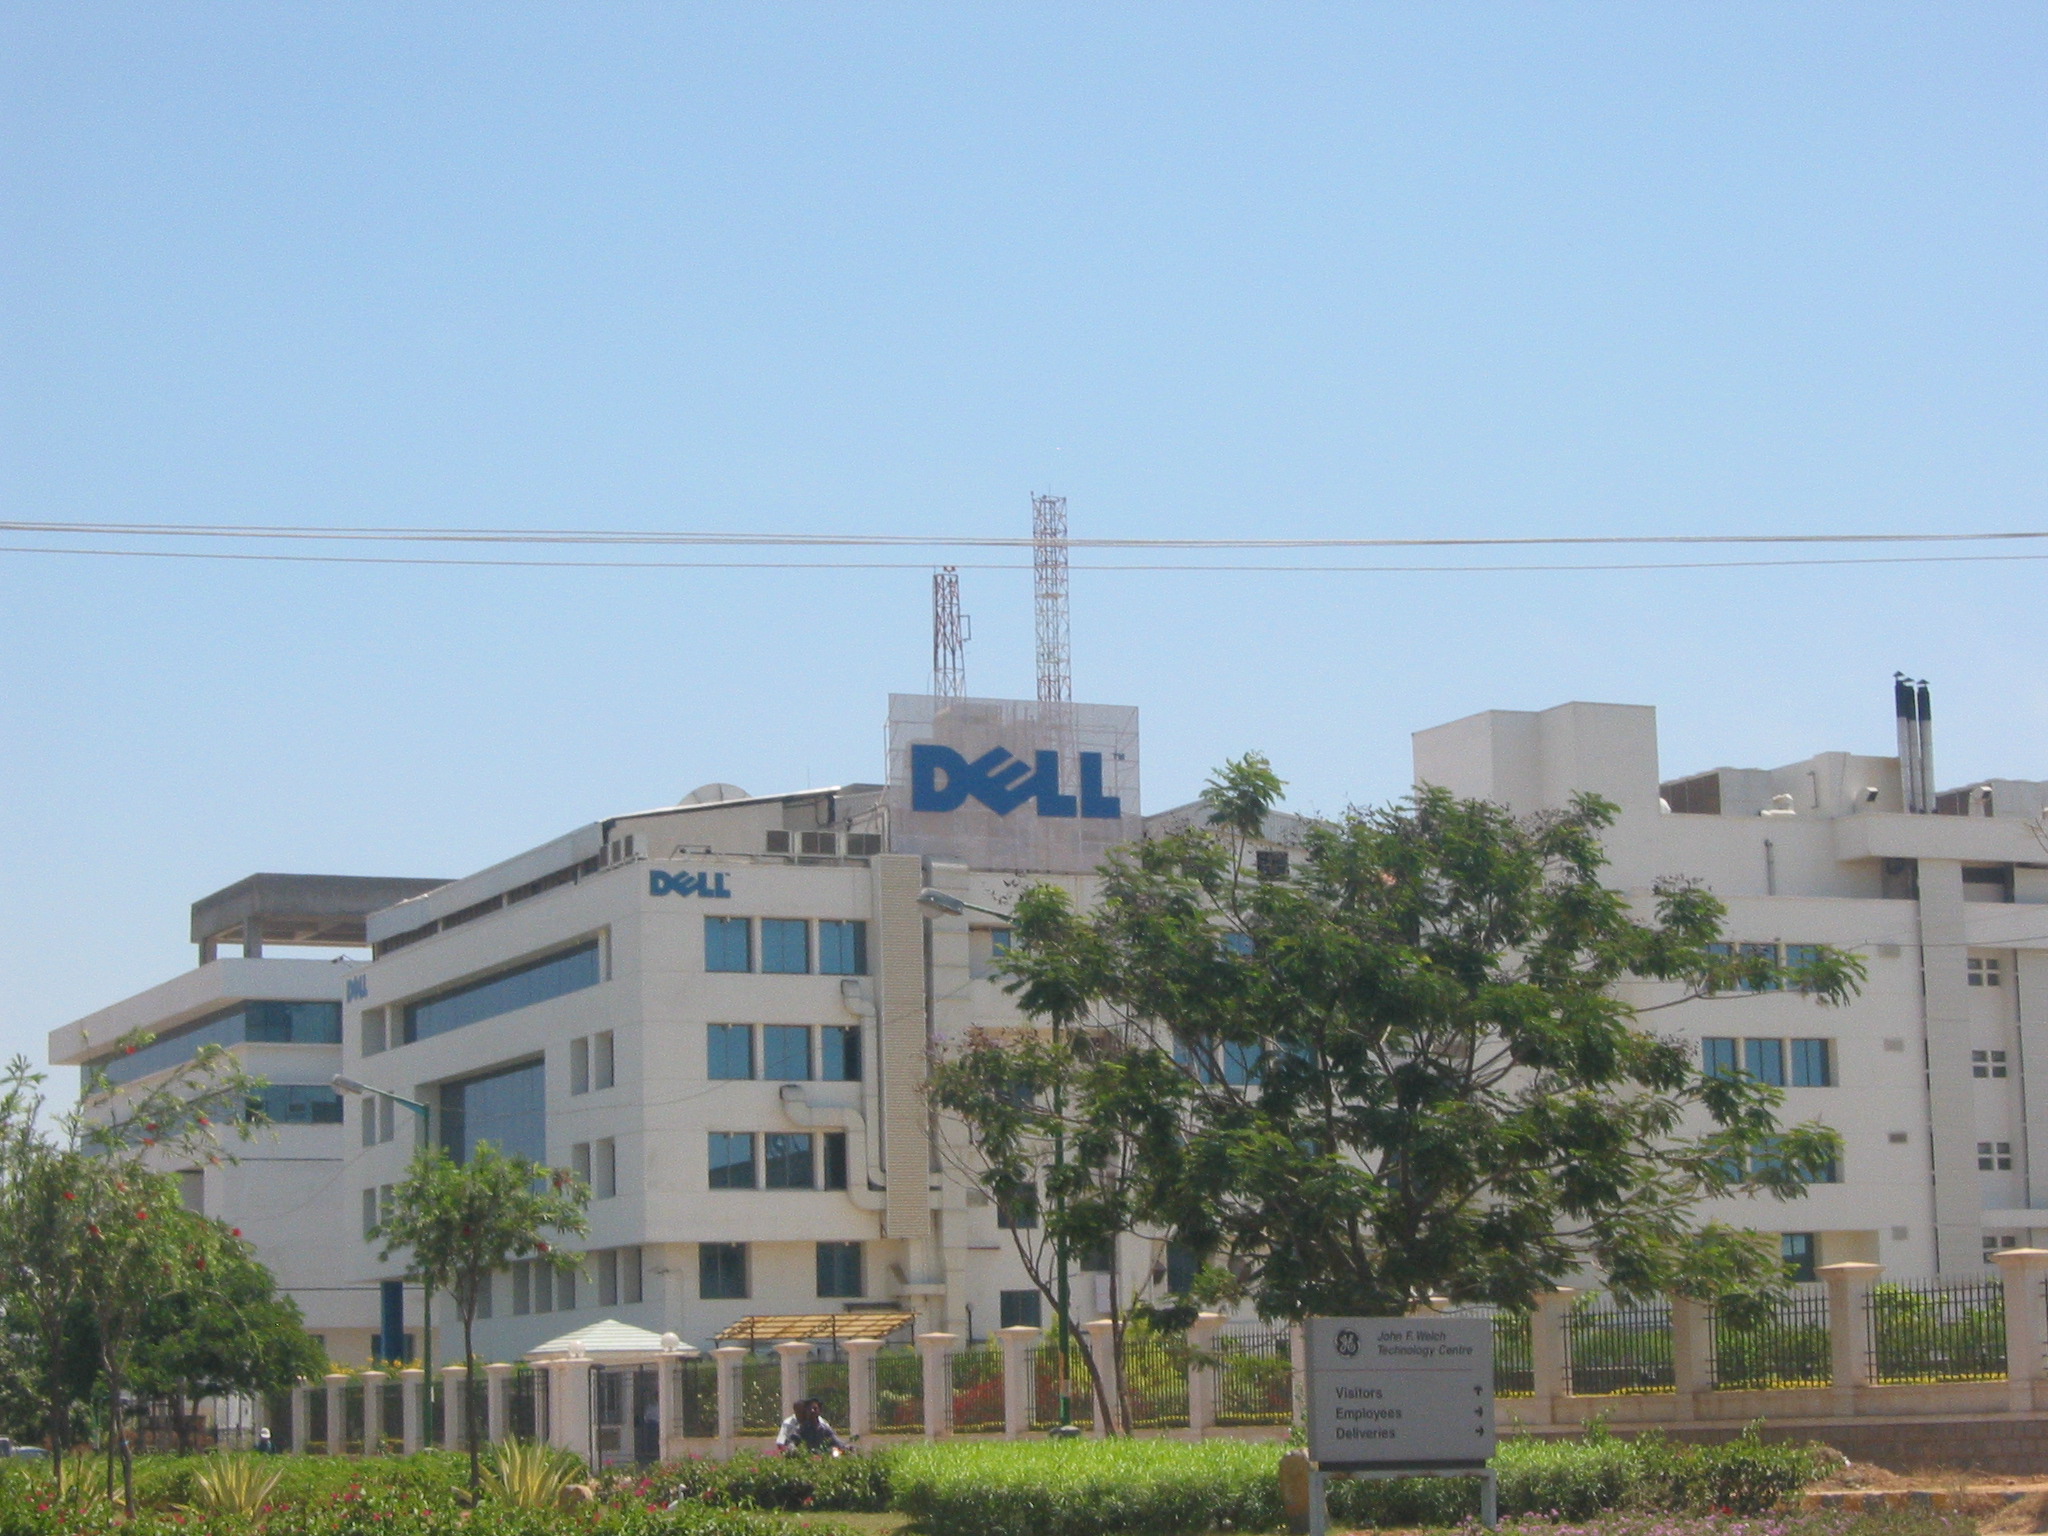 a dell office building is in the distance, and there are other buildings